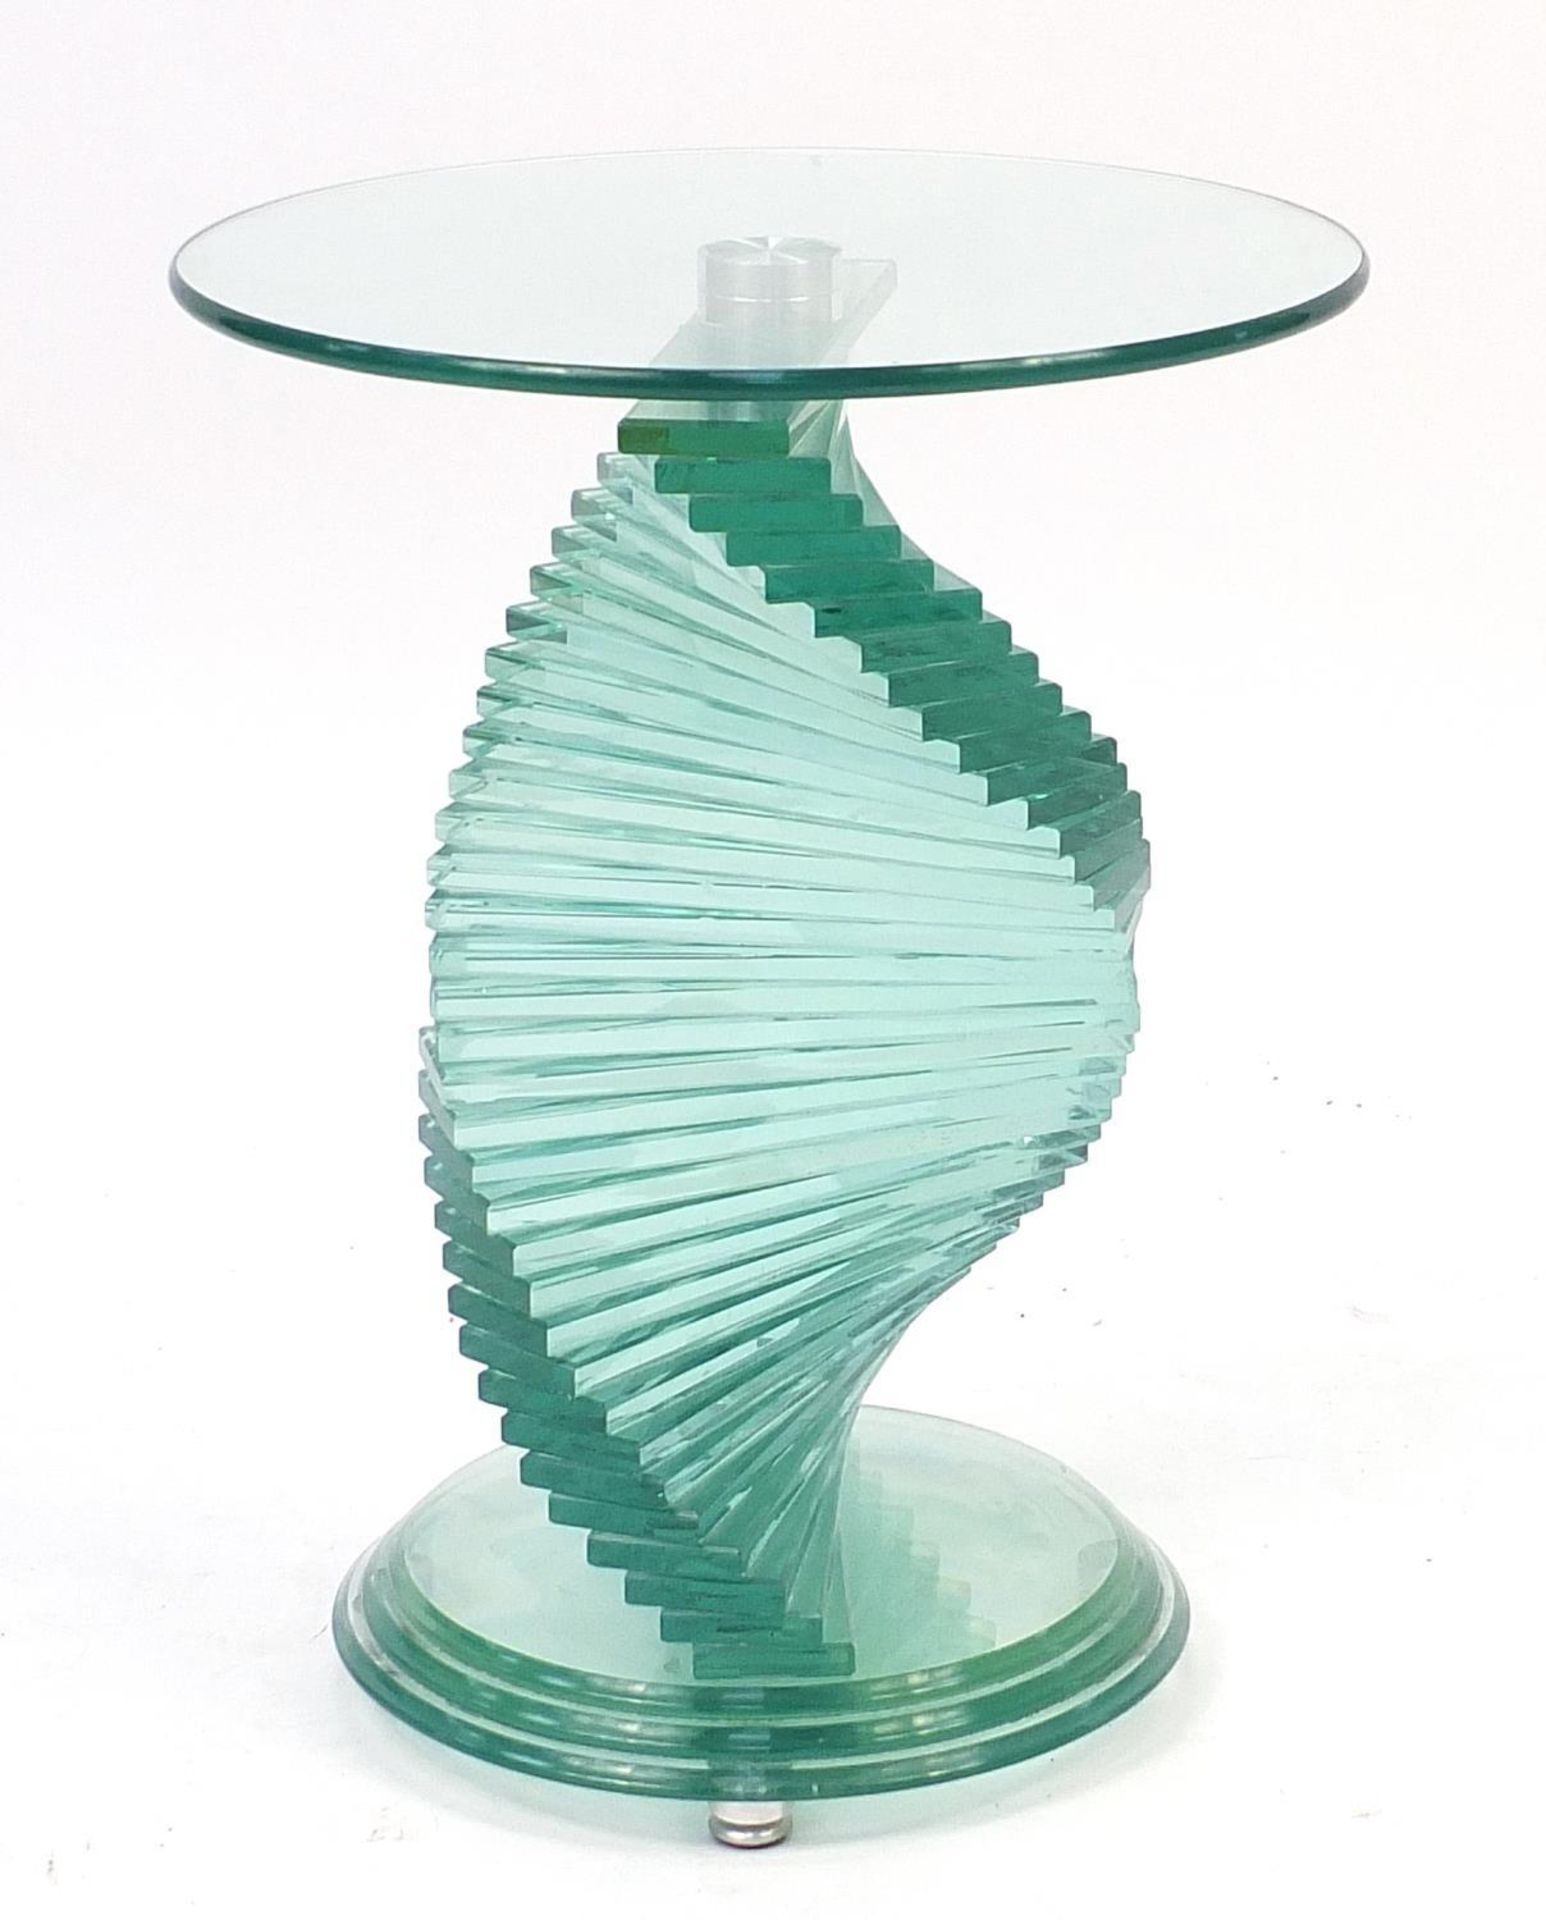 Ravaya, contemporary glass lamp table with spiral staircase design column, 51cm high x 40cm in